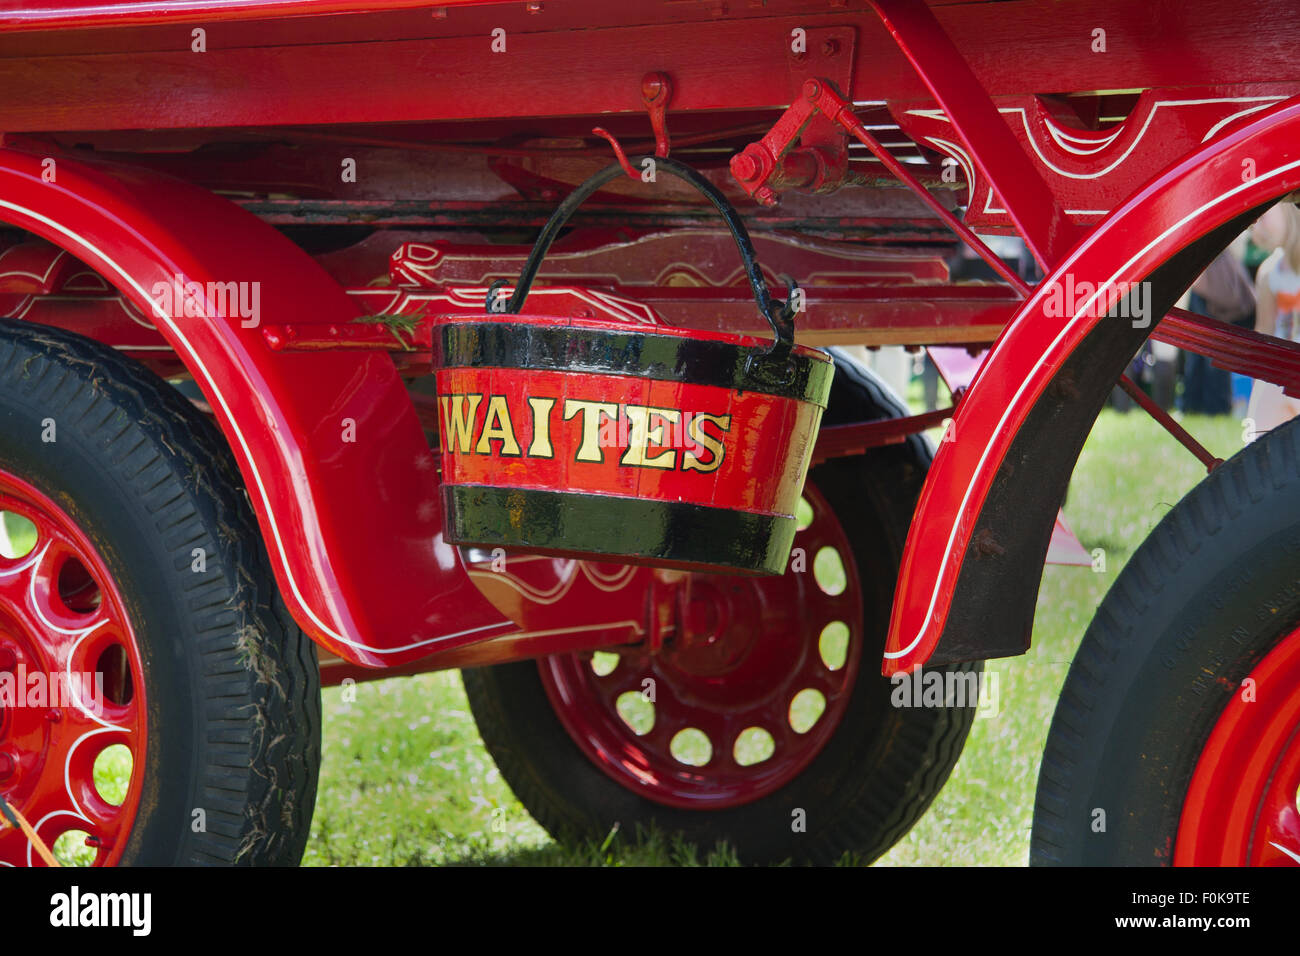 Detail of Thwaites horse-drawn beer dray on show at the Bury Agricultural Show in Lancashire, England, UK. Stock Photo